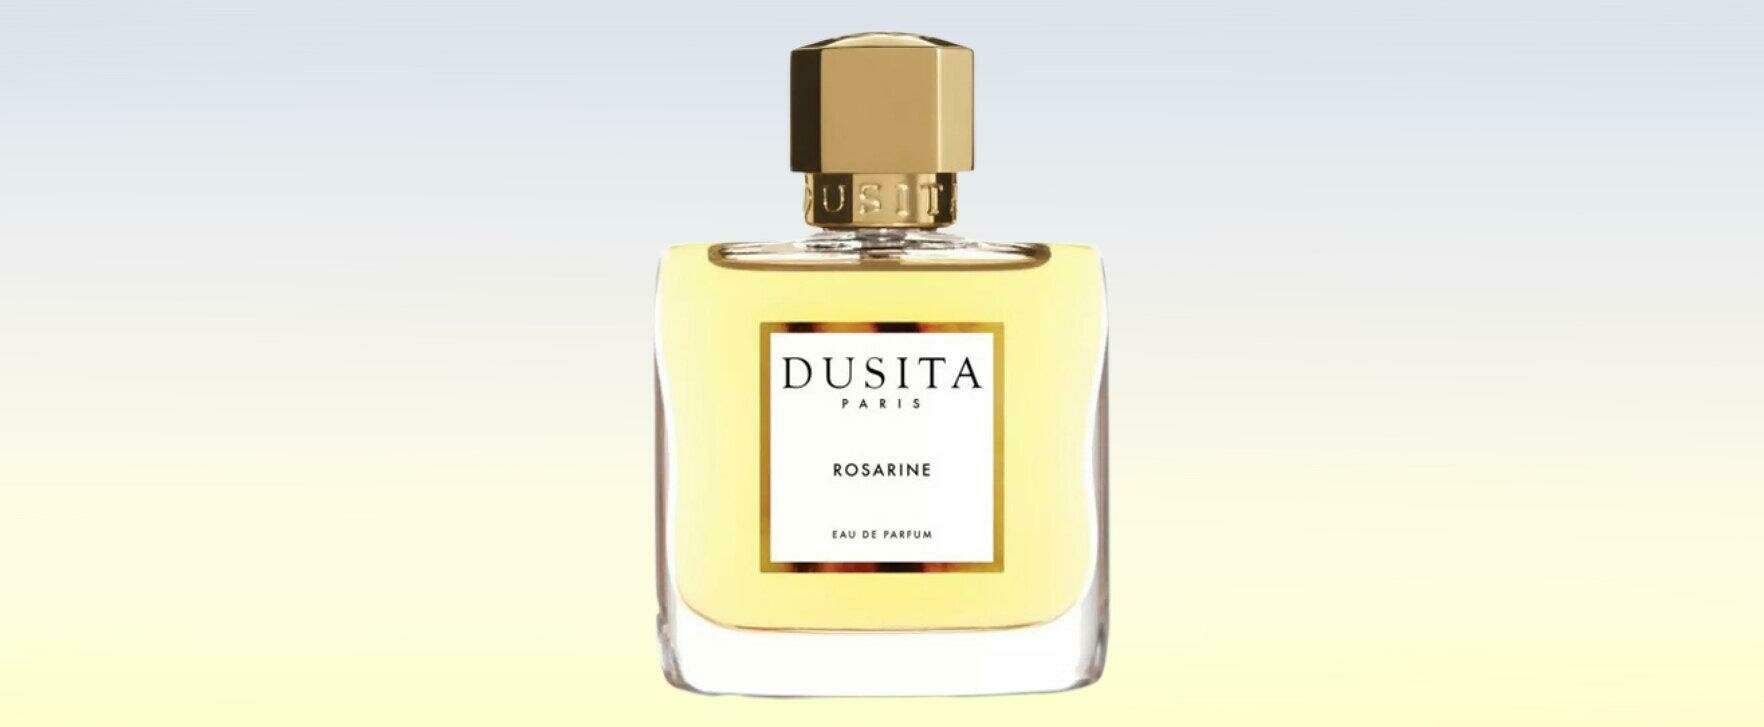 "Rosarine" by Dustia: A Fragrance That Captures the Essence of Roses